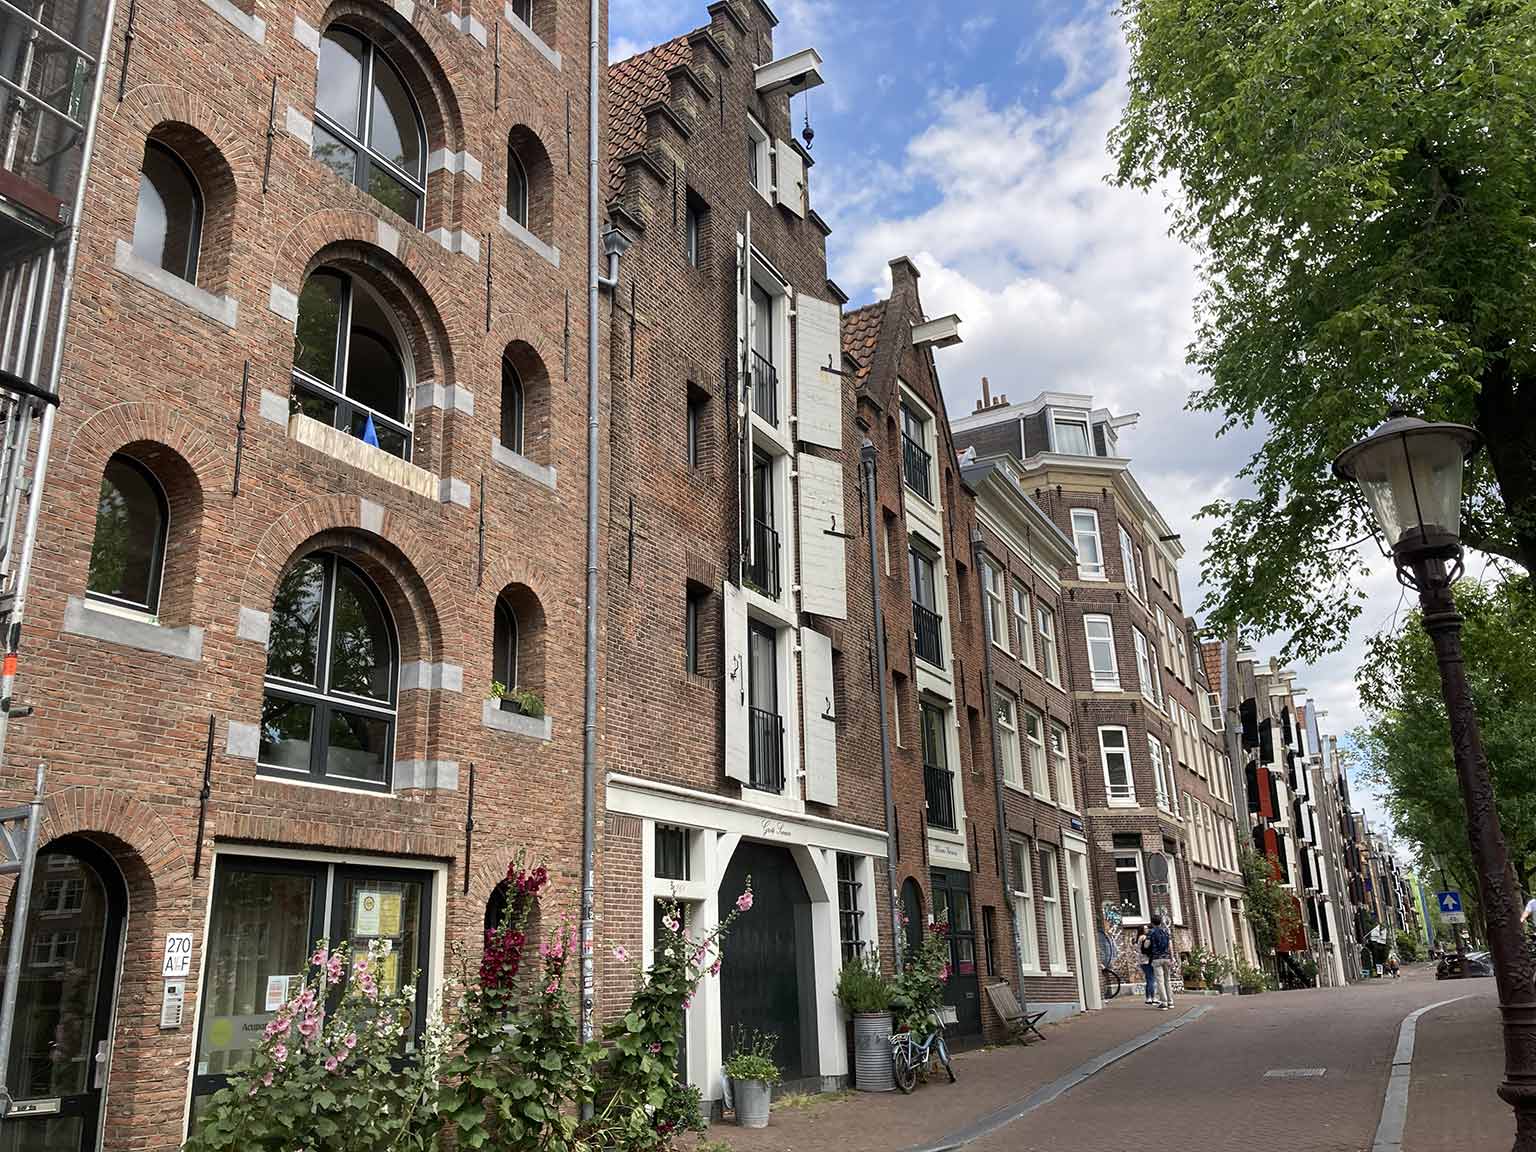 Warehouses at Brouwersgracht 268-266, Amsterdam, looking east